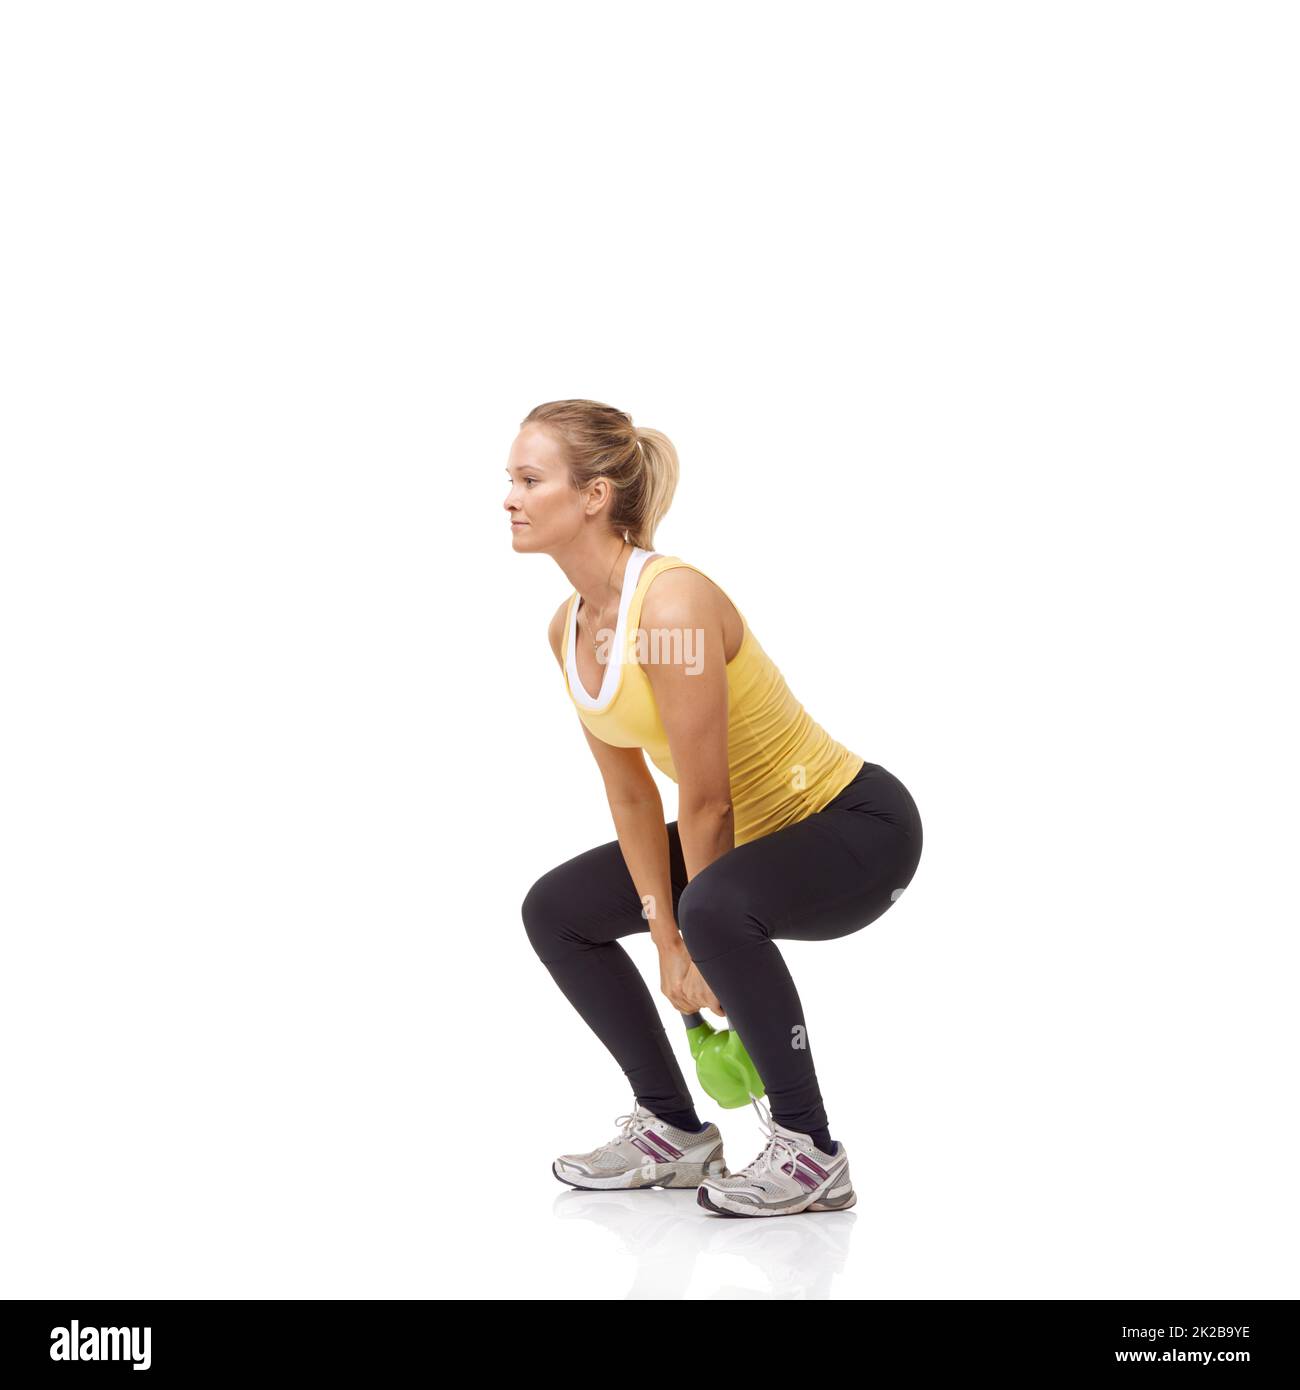 Getting ready to swing her kettlebell. A beautiful blonde woman performing a two-handed kettlebell swing. Stock Photo